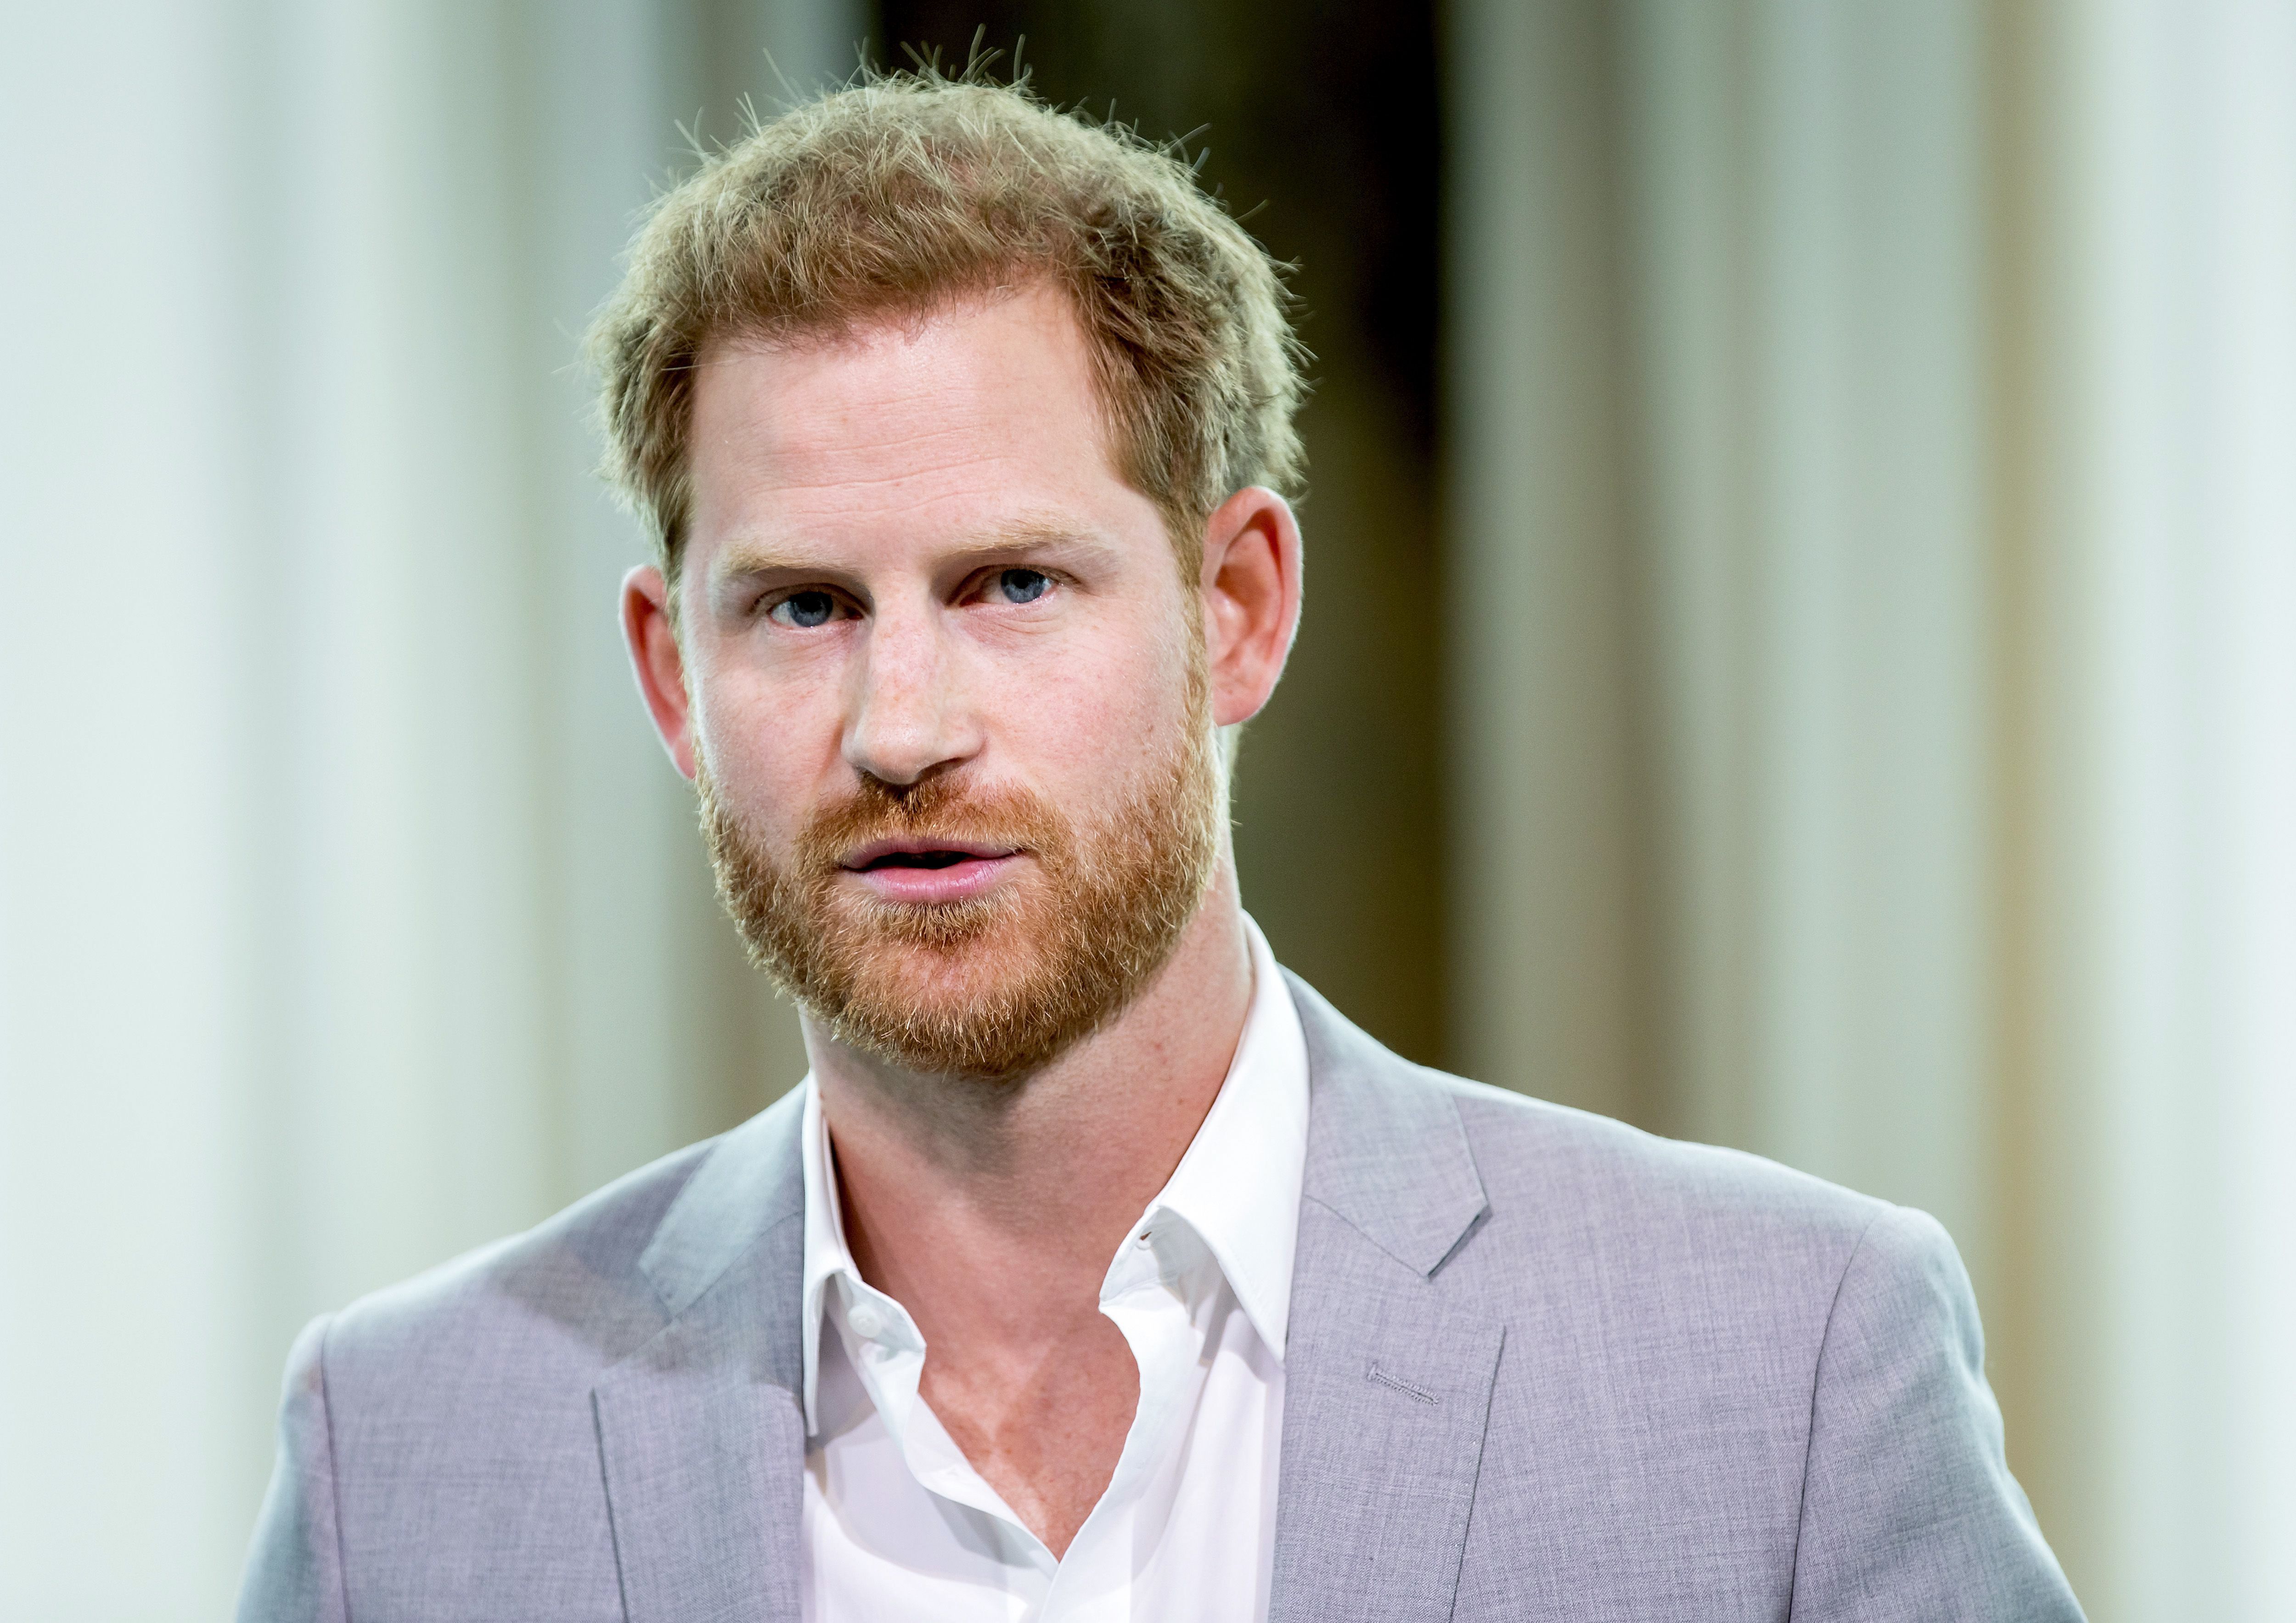 britains-prince-harry-attends-the-adam-tower-project-news-photo-1682427094.jpg